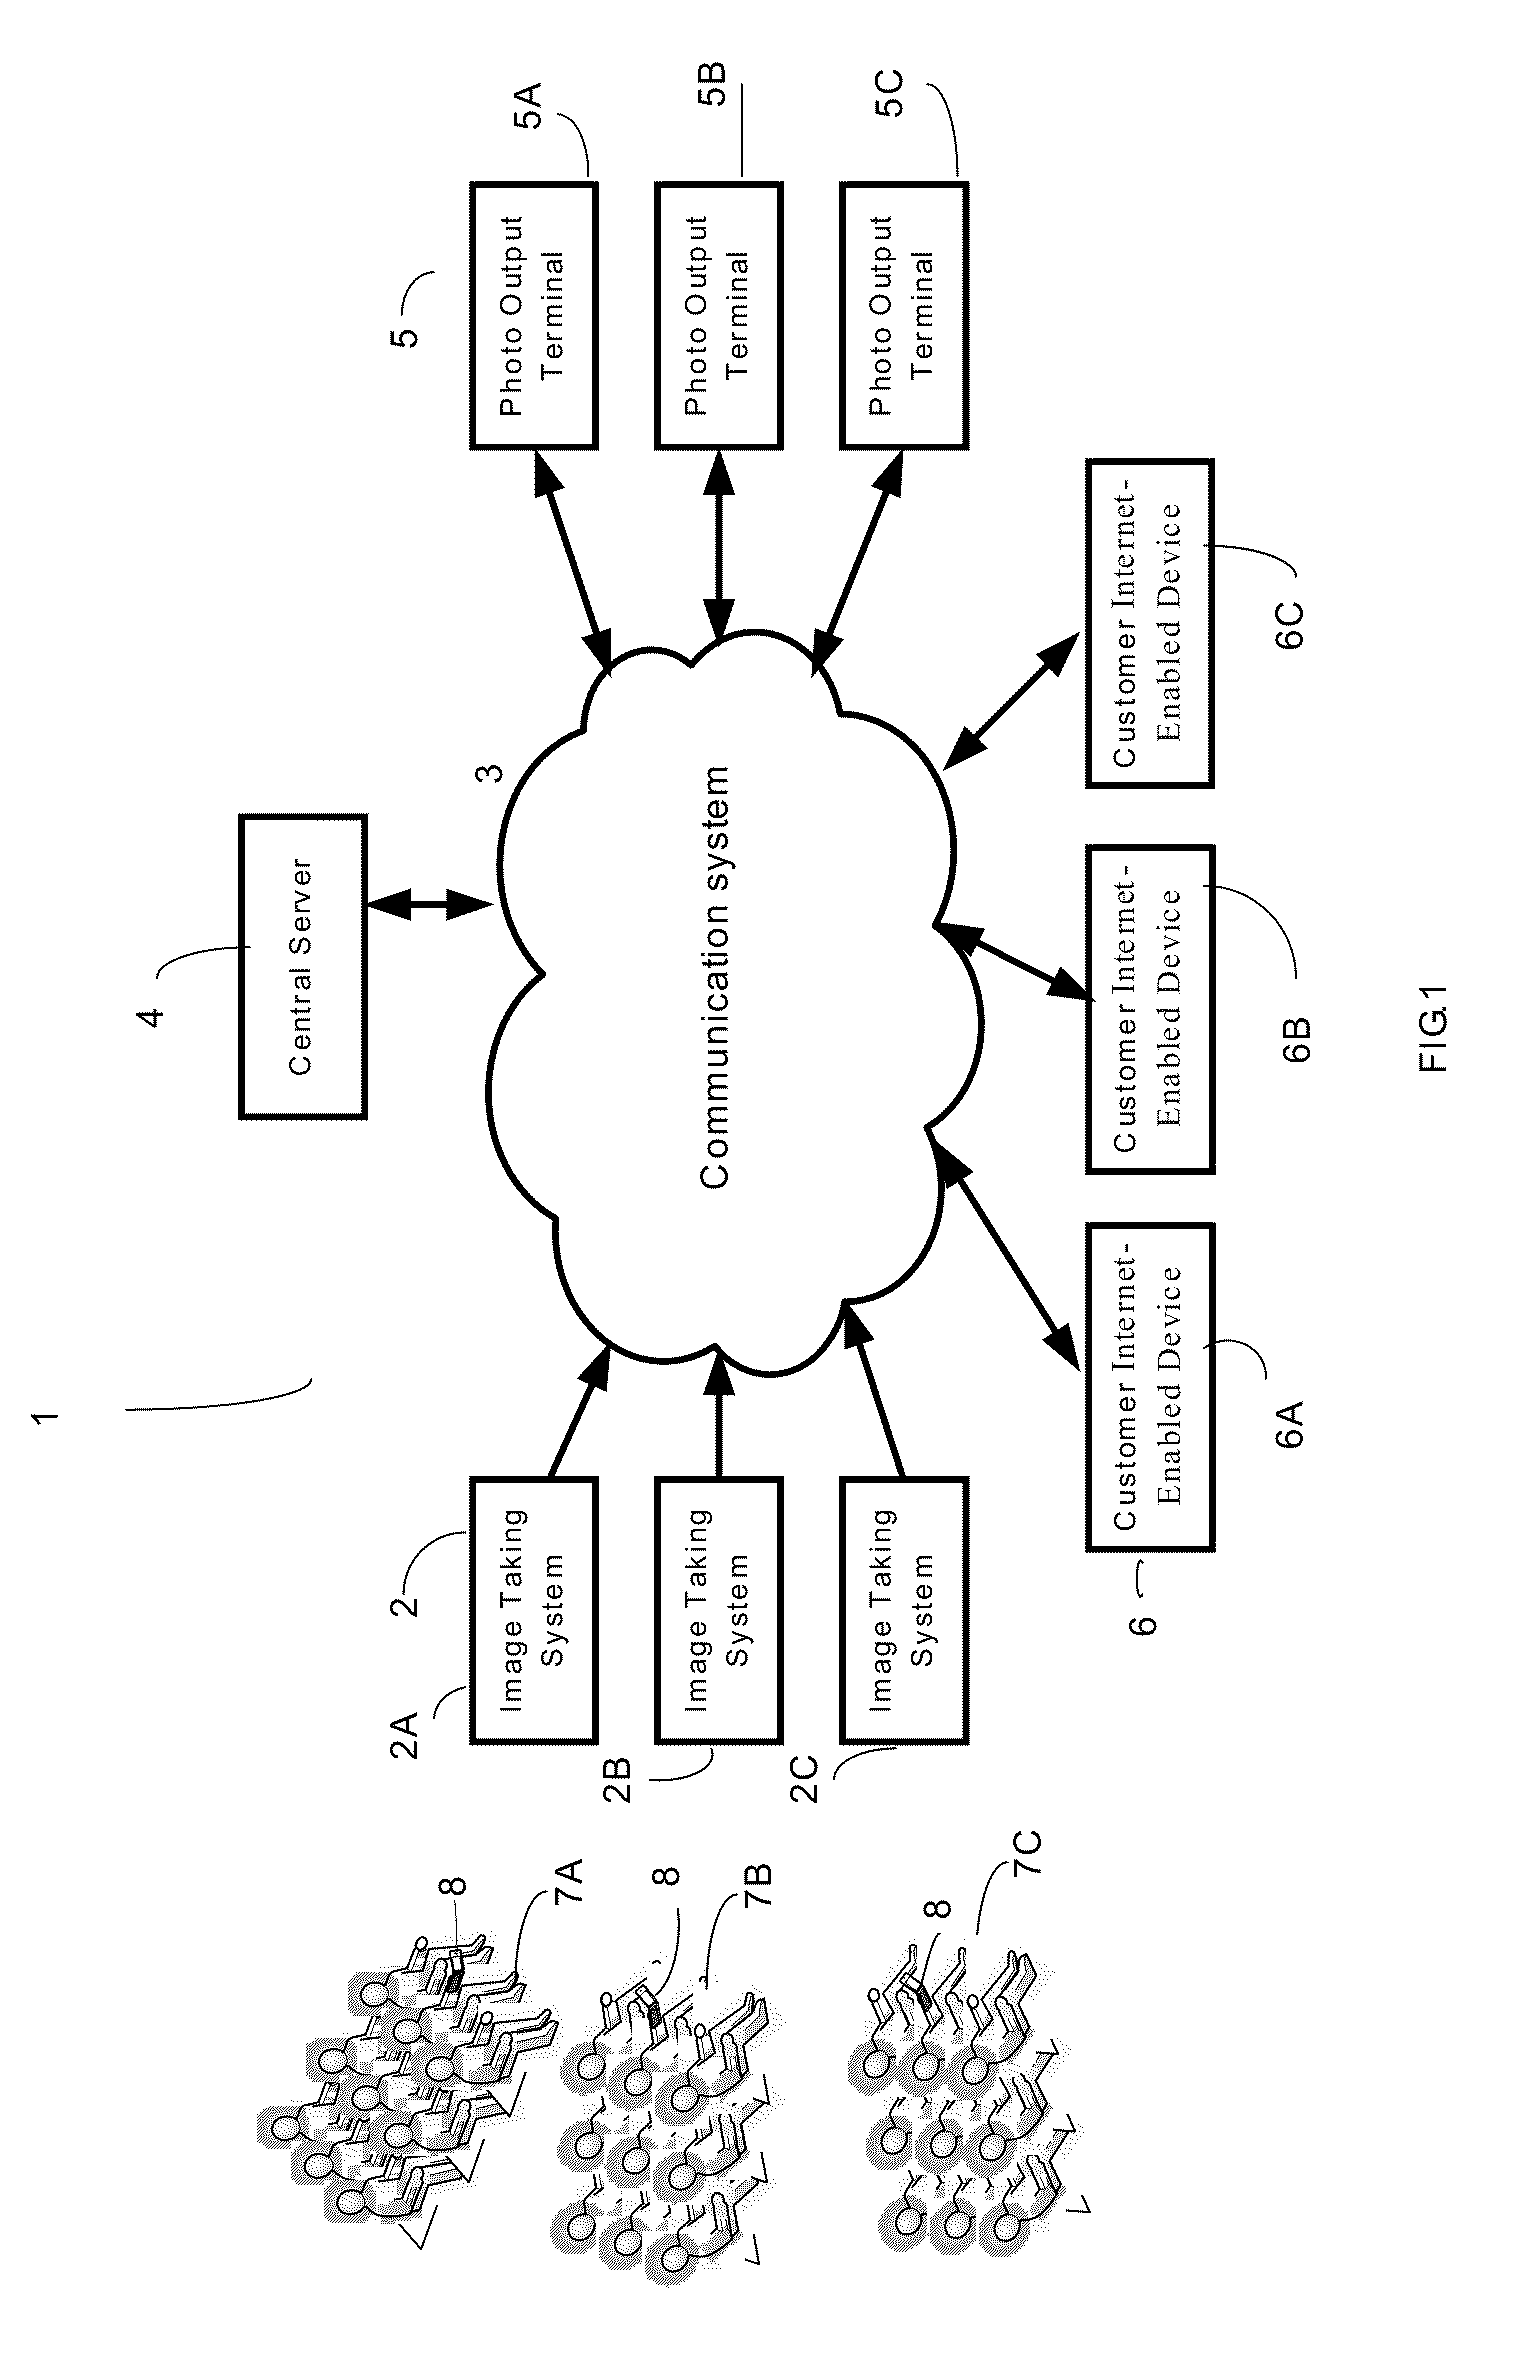 Image management system and method of selecting at least one of a plurality of cameras